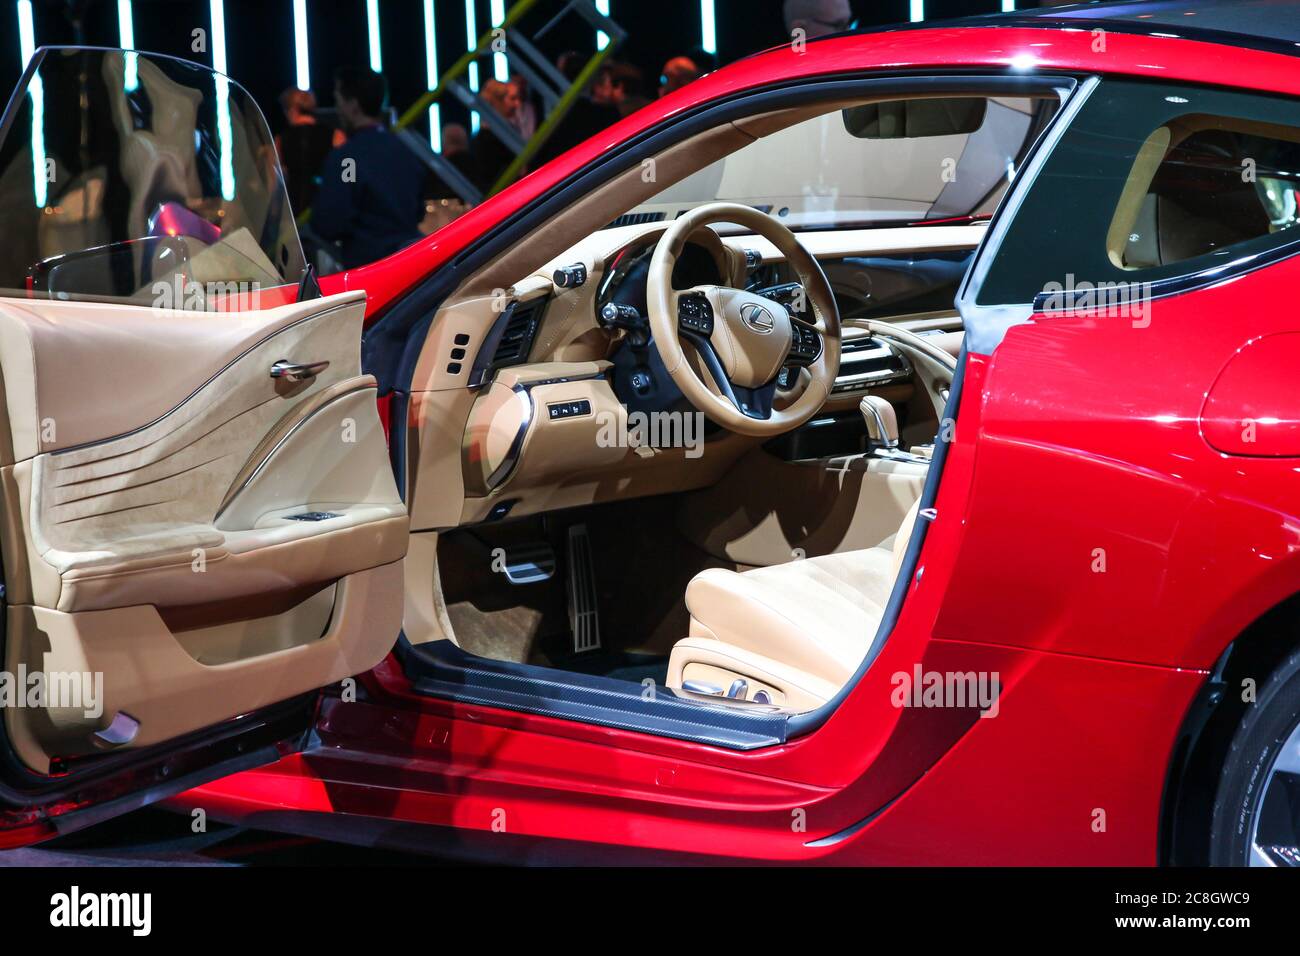 NEW YORK - March 23: A Lexus LC 500 exhibit at the 2016 New York International Auto Show during Press day,  public show is running from March 25th thr Stock Photo